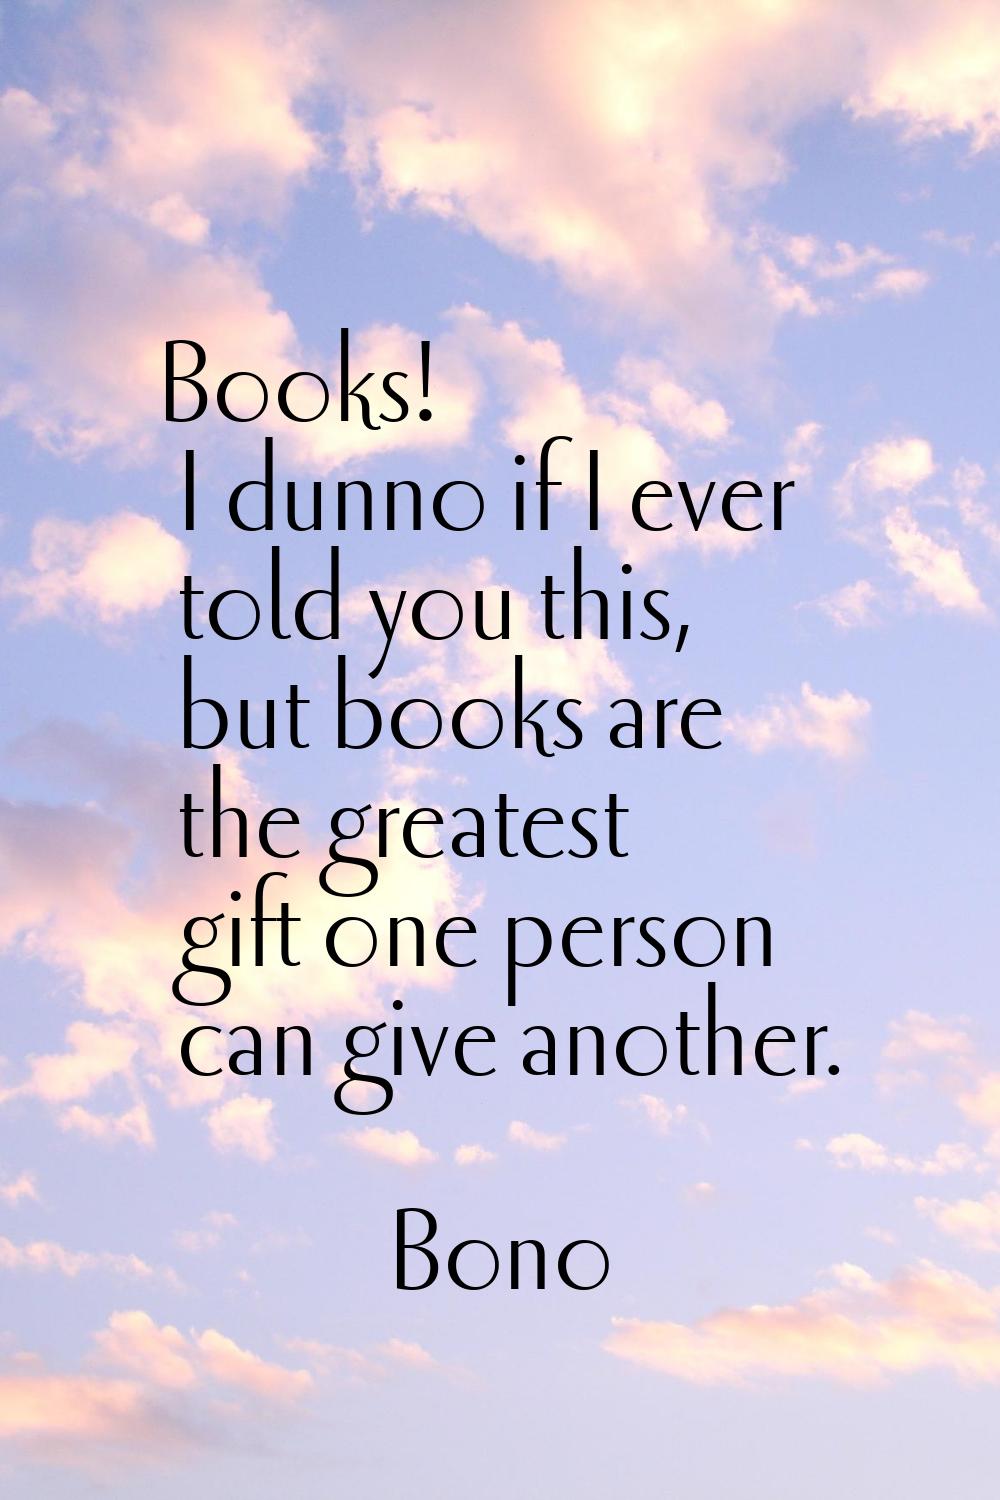 Books! I dunno if I ever told you this, but books are the greatest gift one person can give another